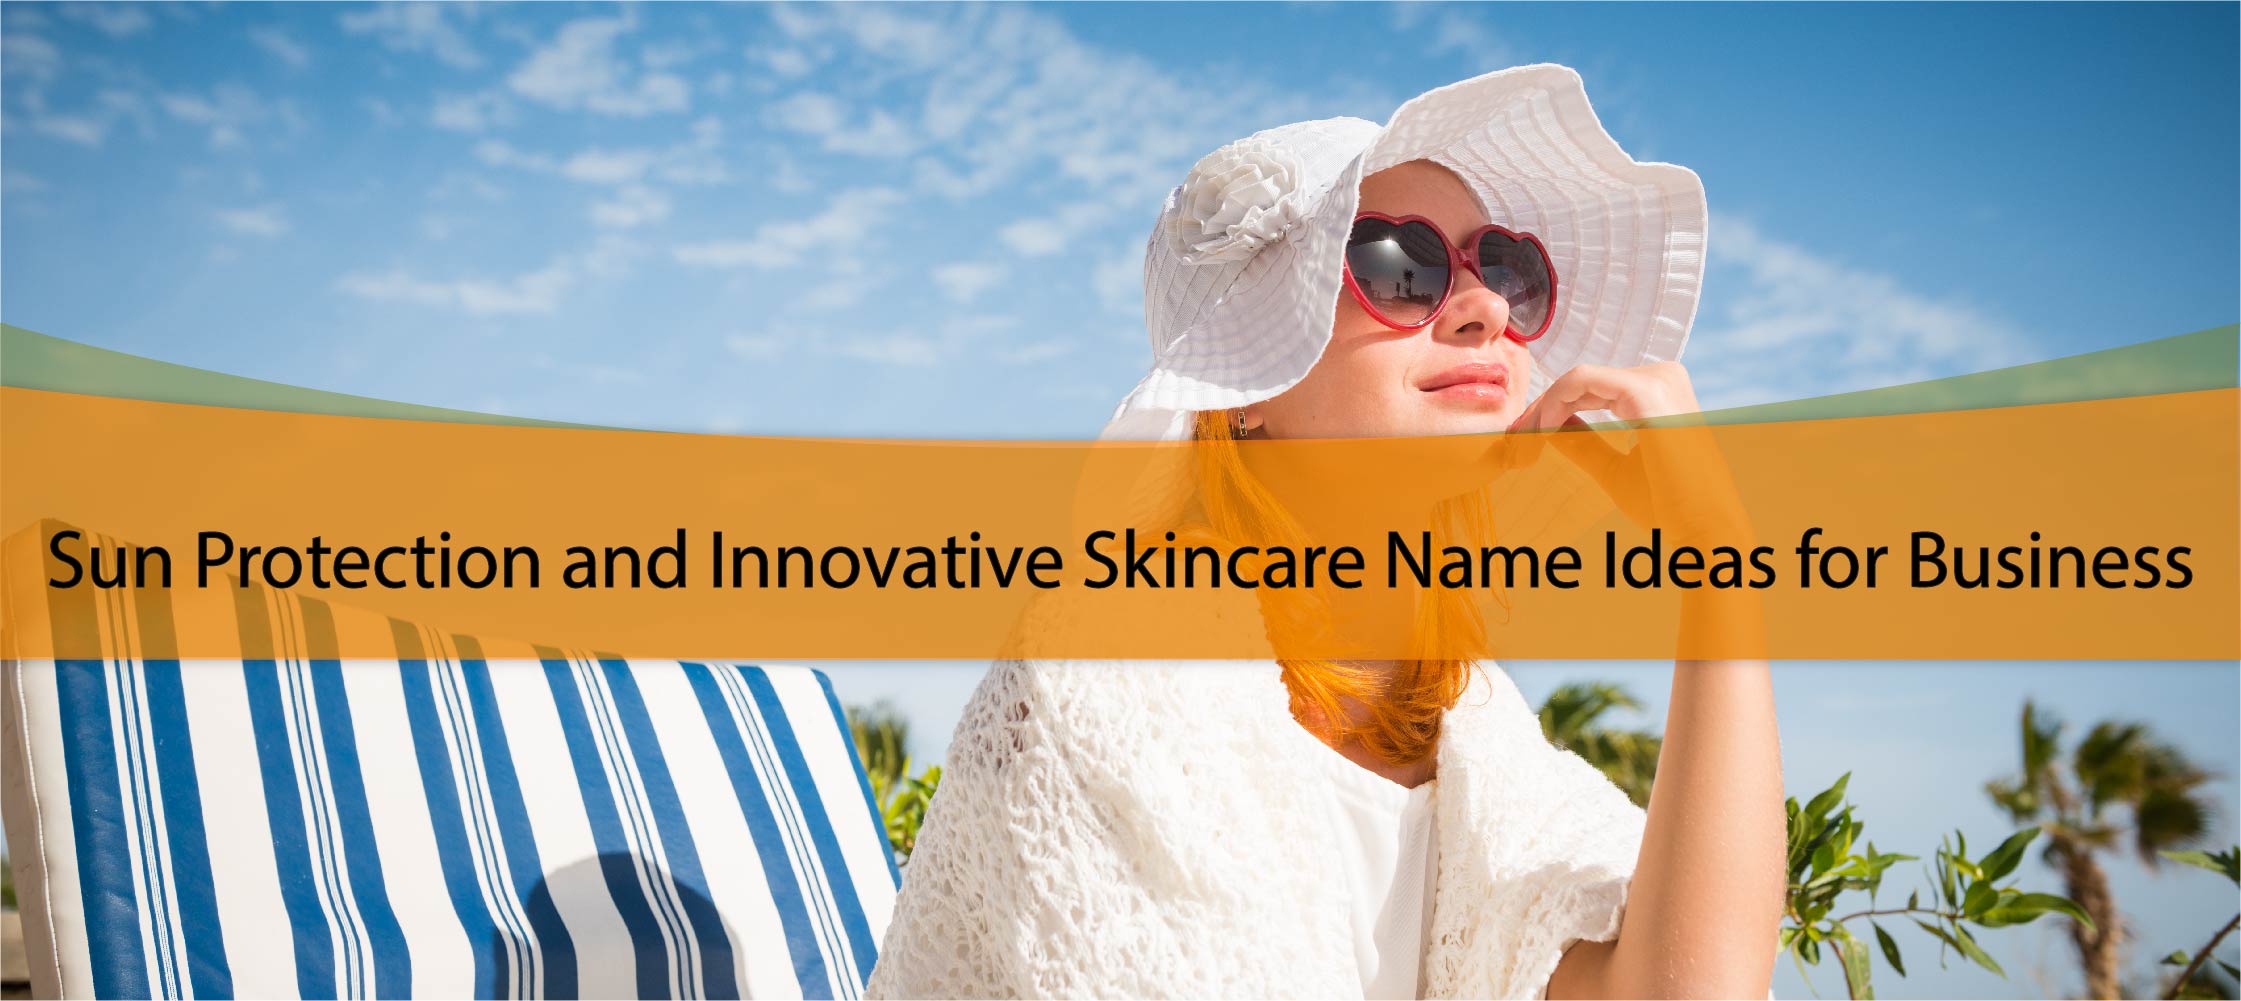 Sun Protection and Innovative Skincare Name Ideas for Business